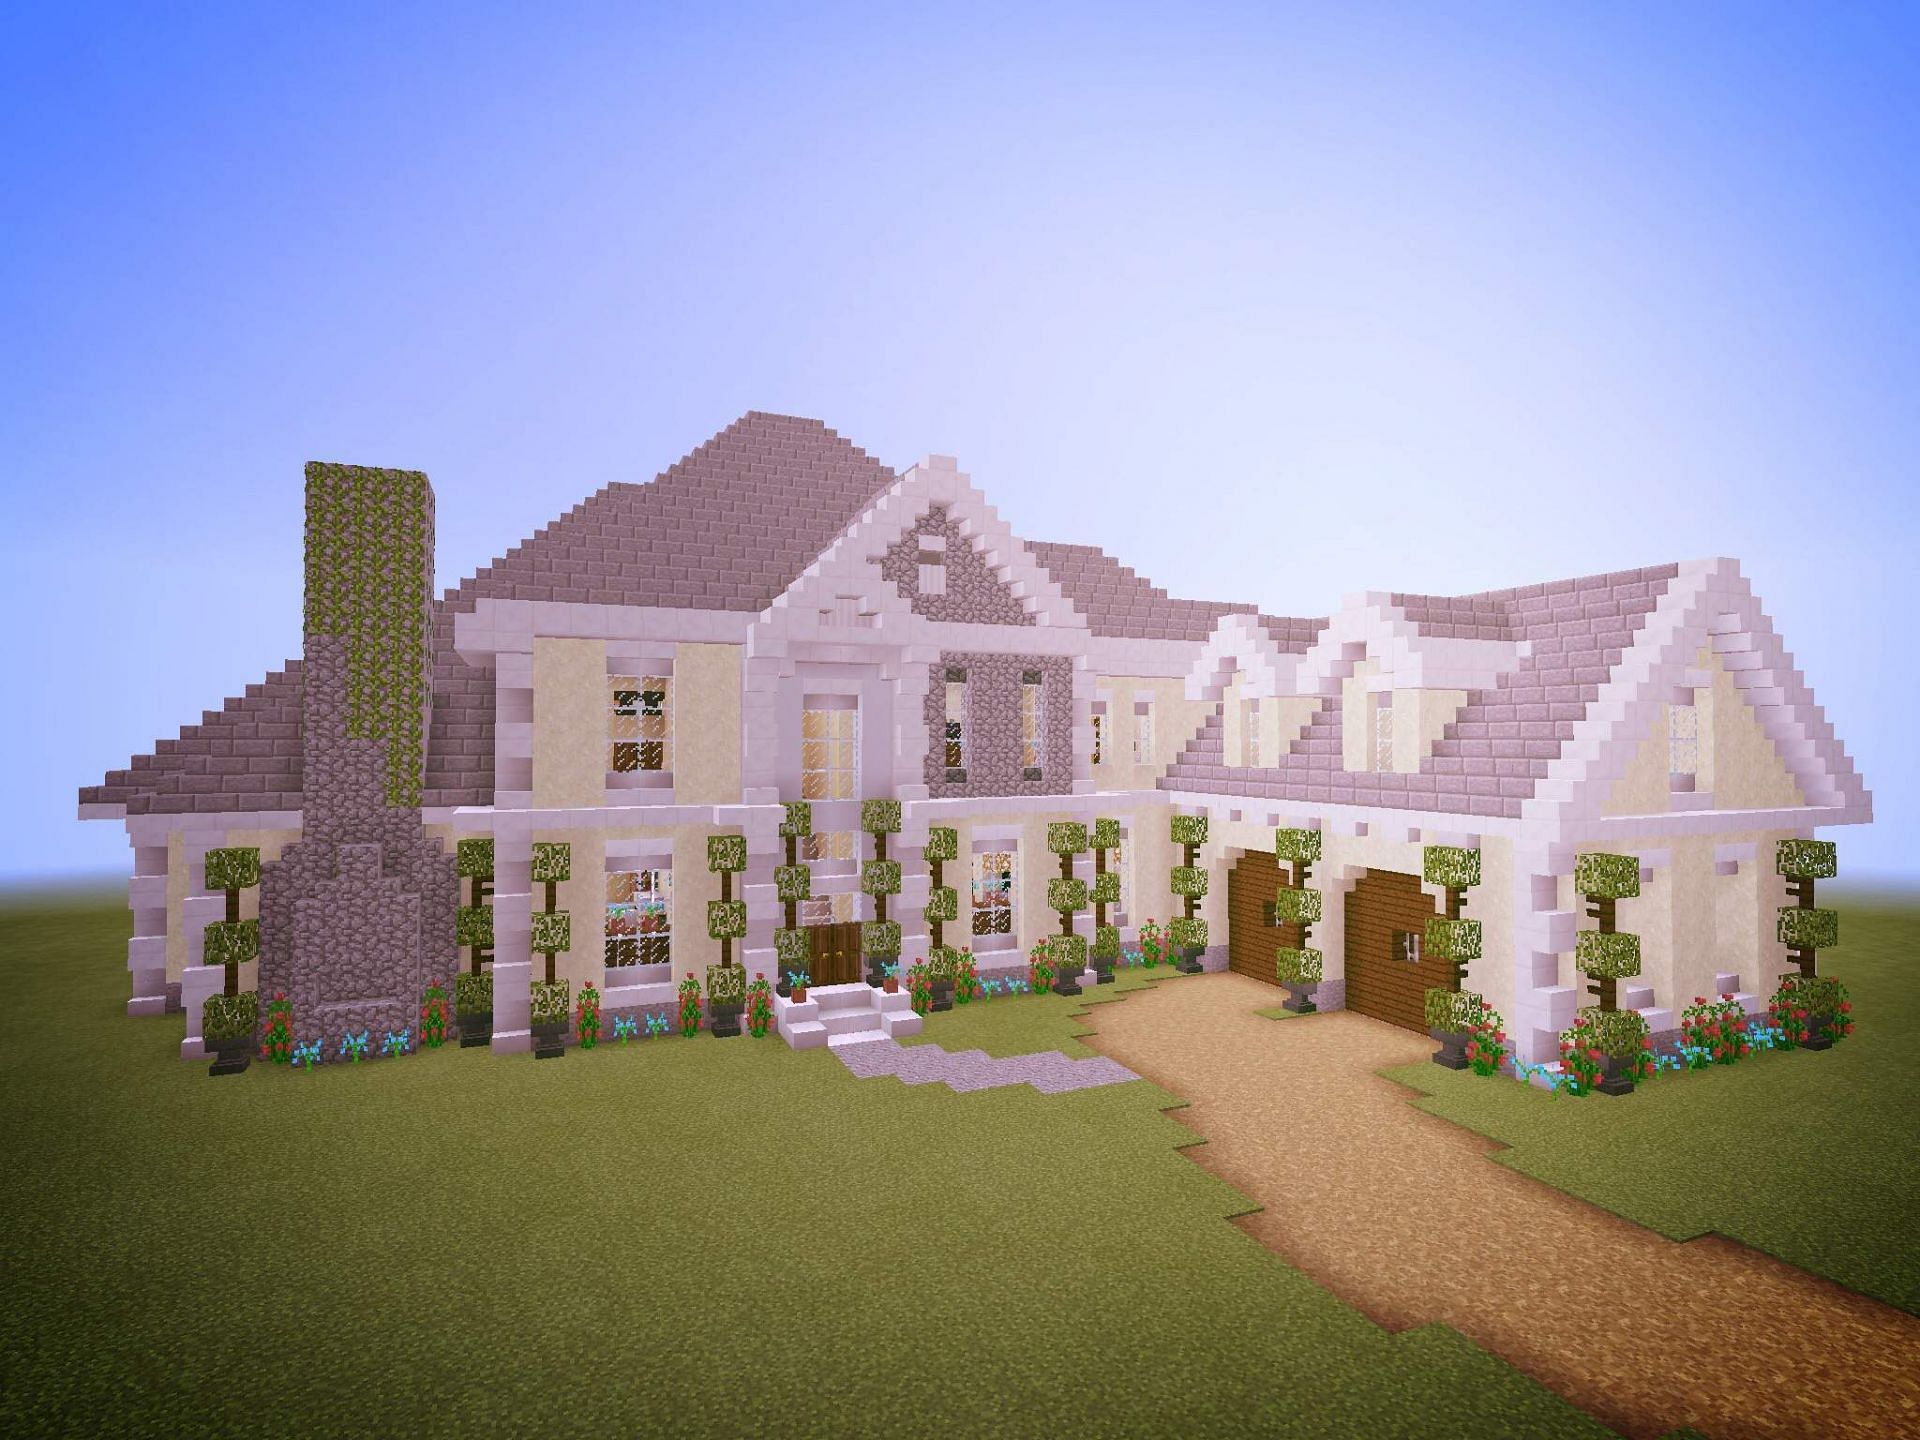 Mansions in Minecraft take plenty of effort but emanate a very lavish appearance (Image via Elite Fox/Amino Apps)